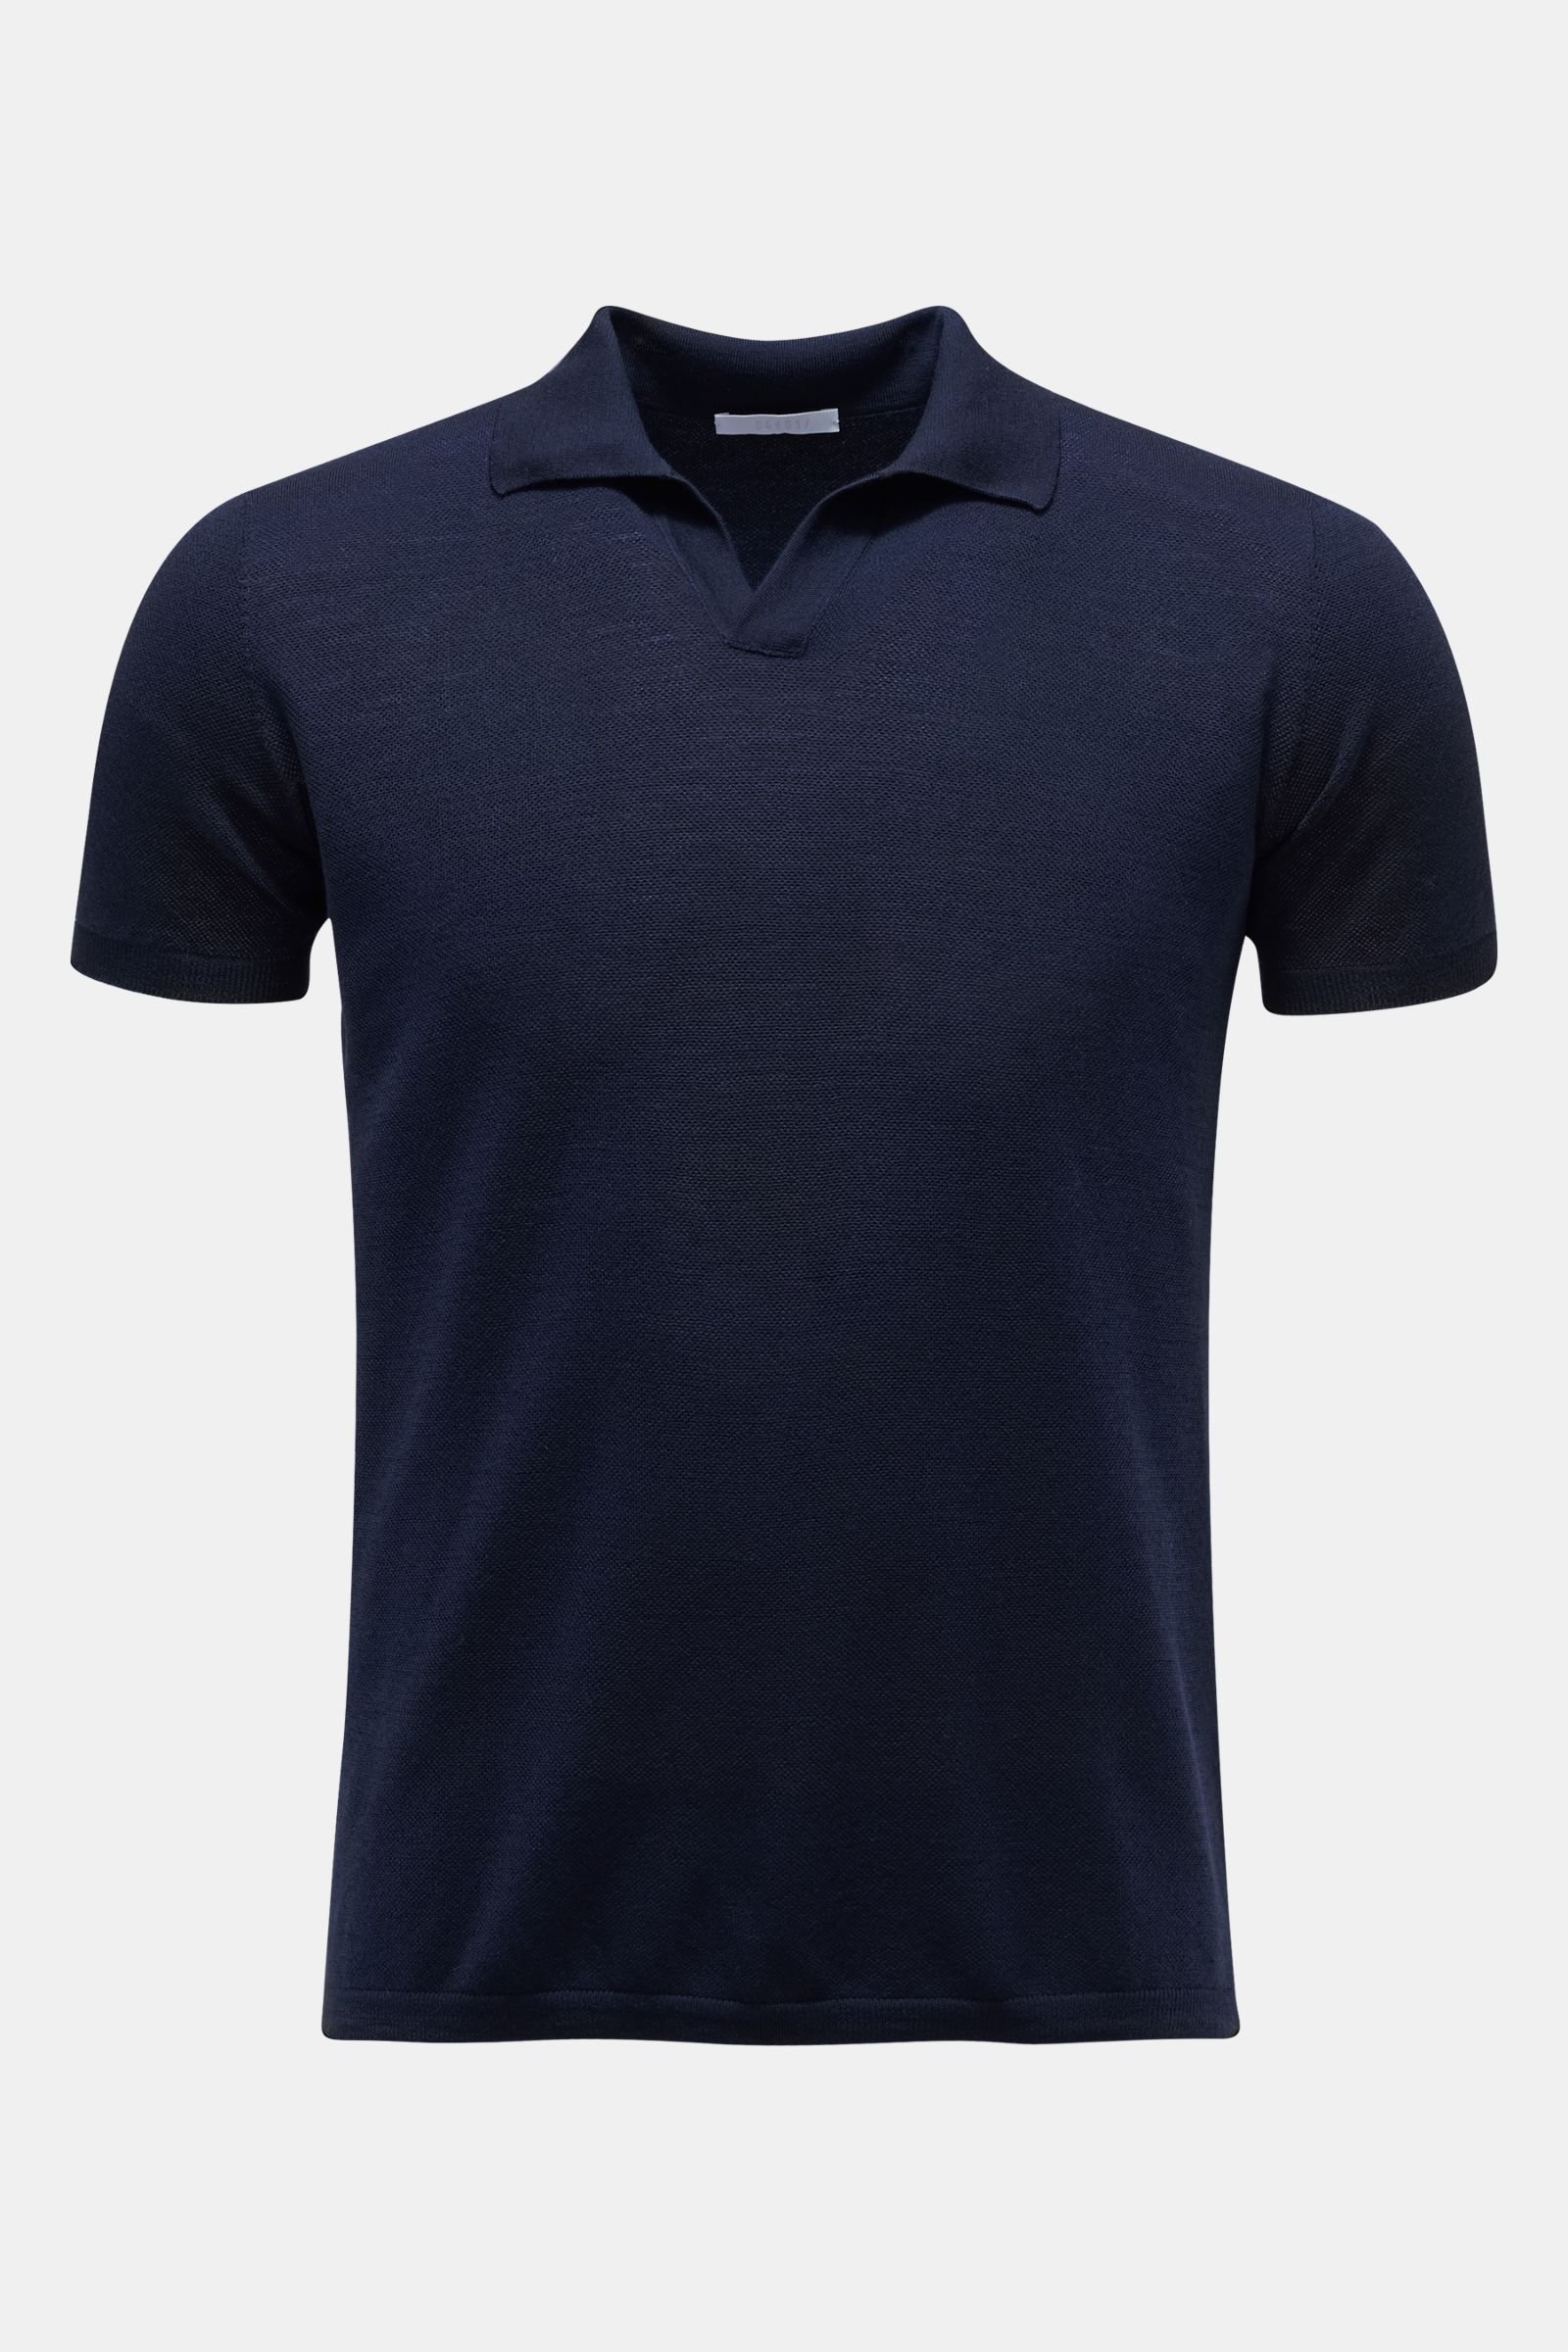 Short sleeve knit polo shirt 'The Ultimate Polo' navy 